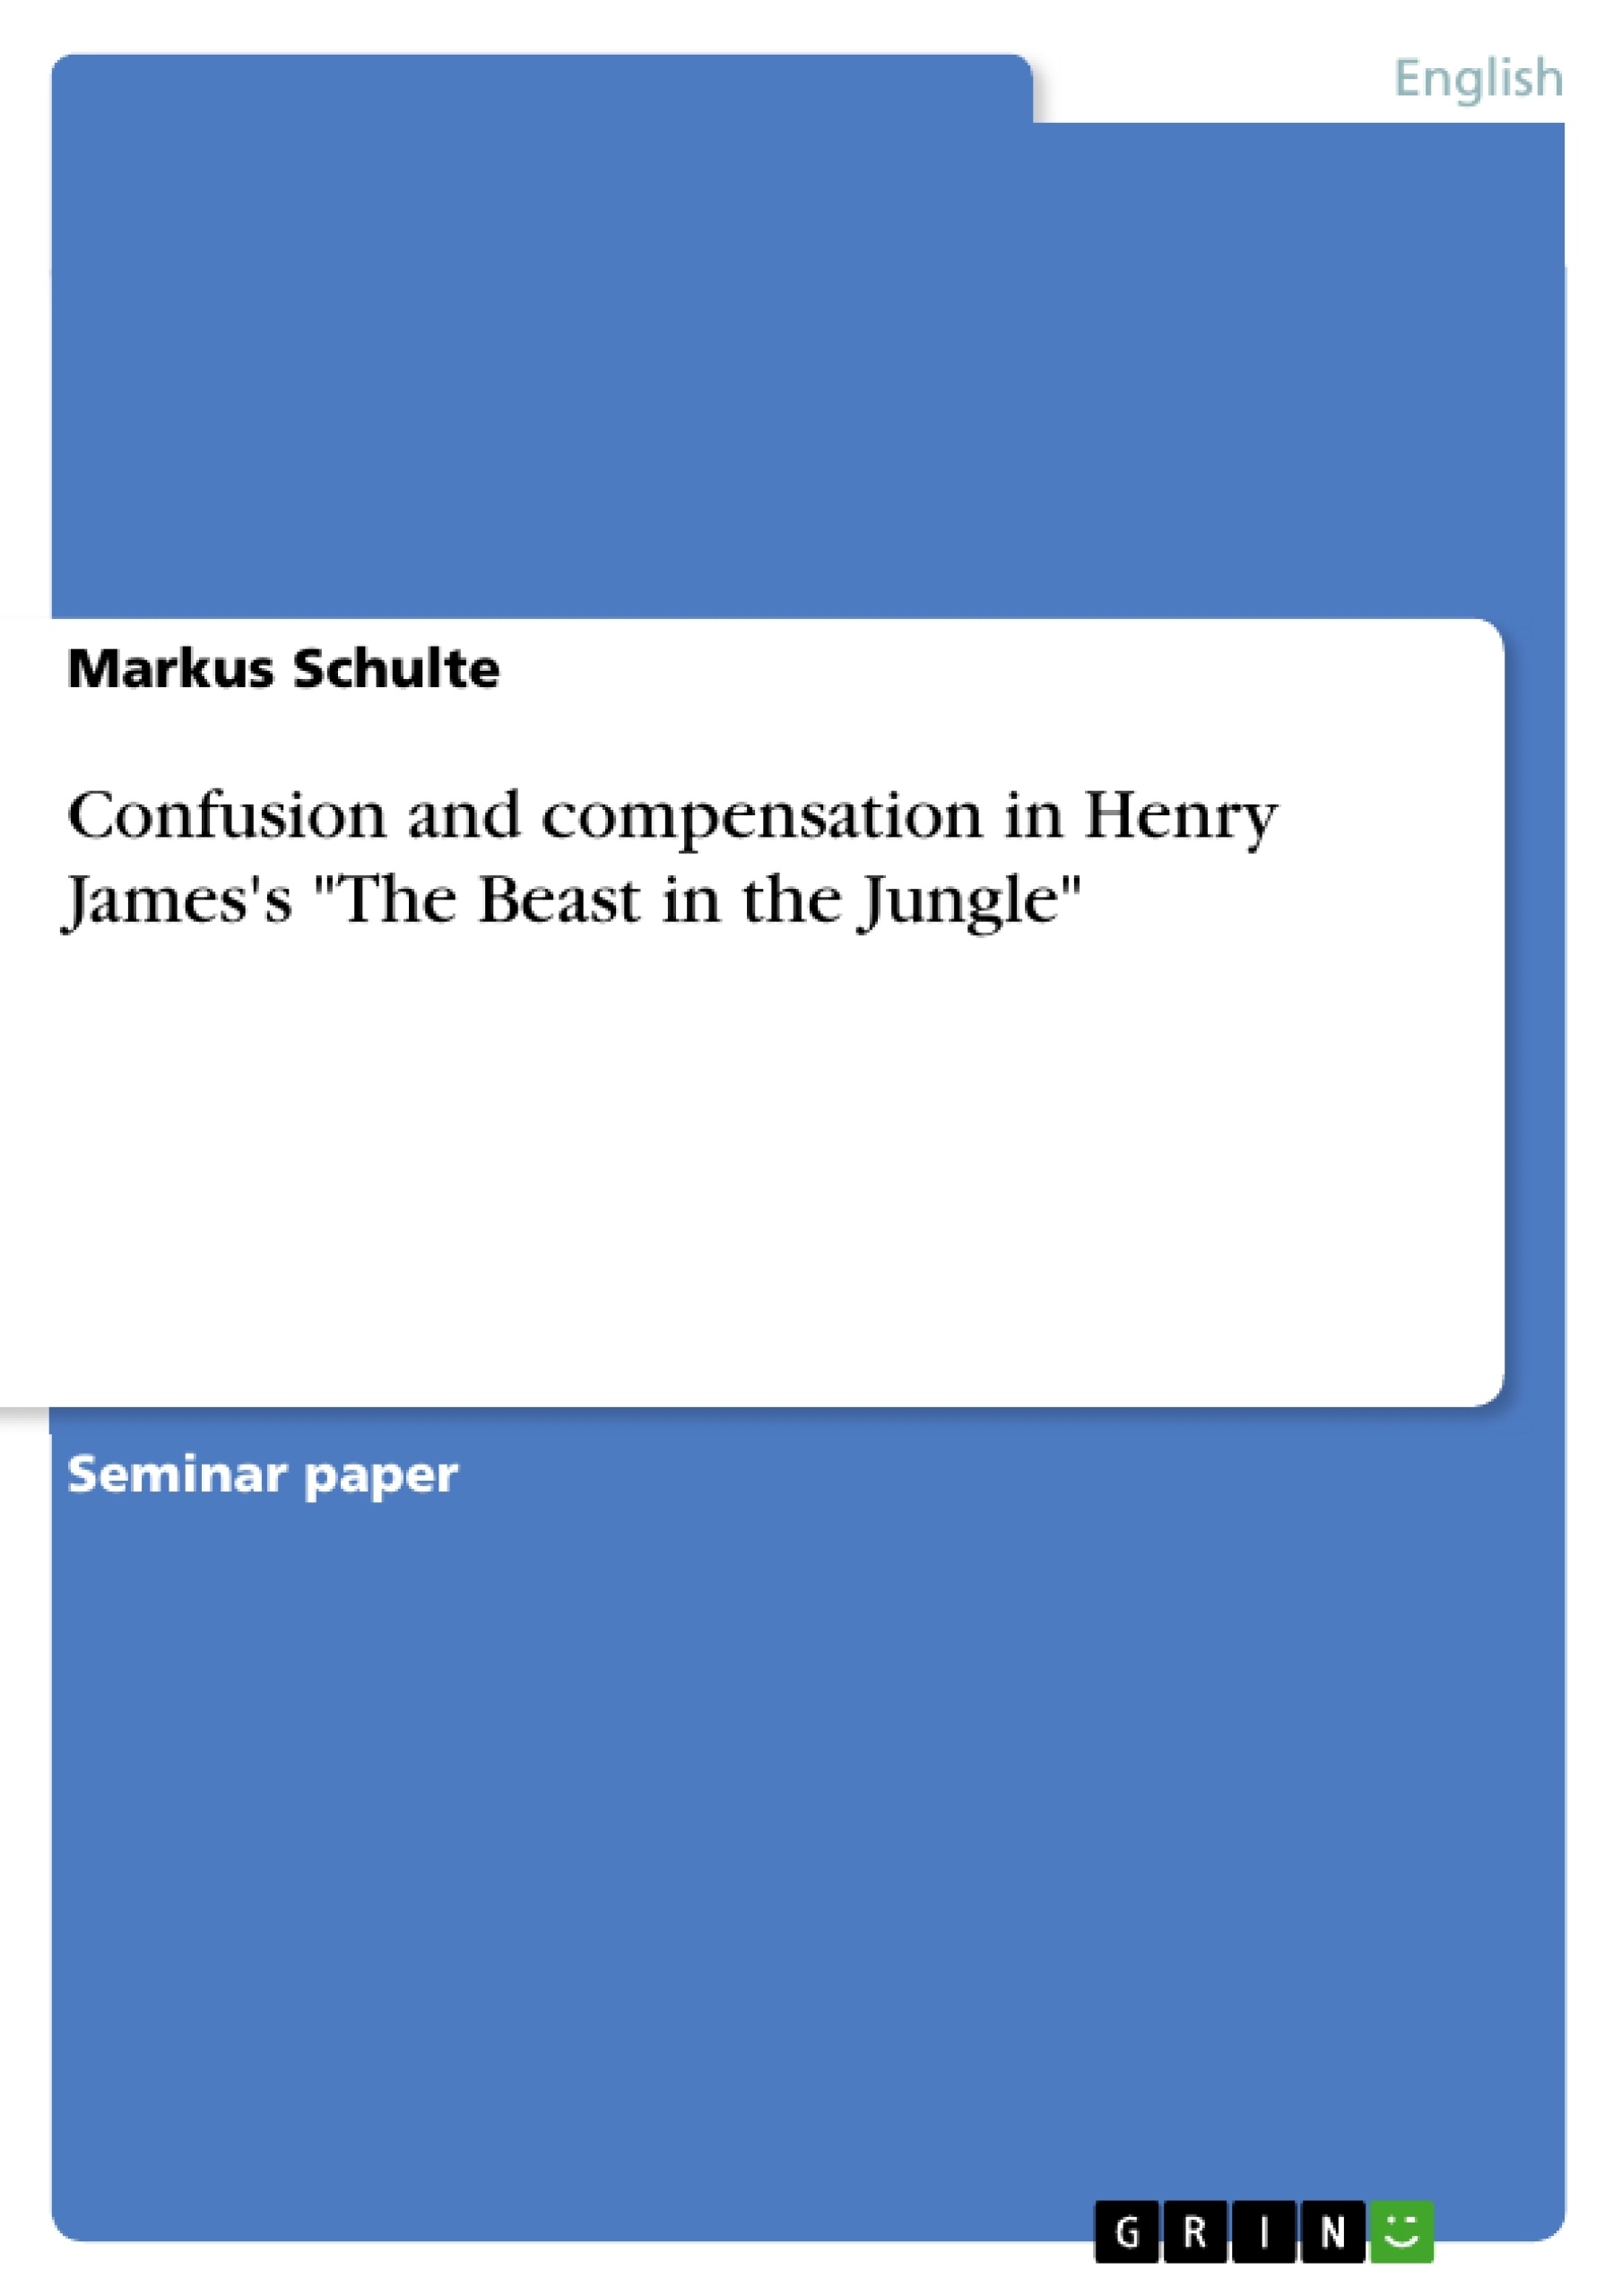 Title: Confusion and compensation in Henry James's "The Beast in the Jungle"